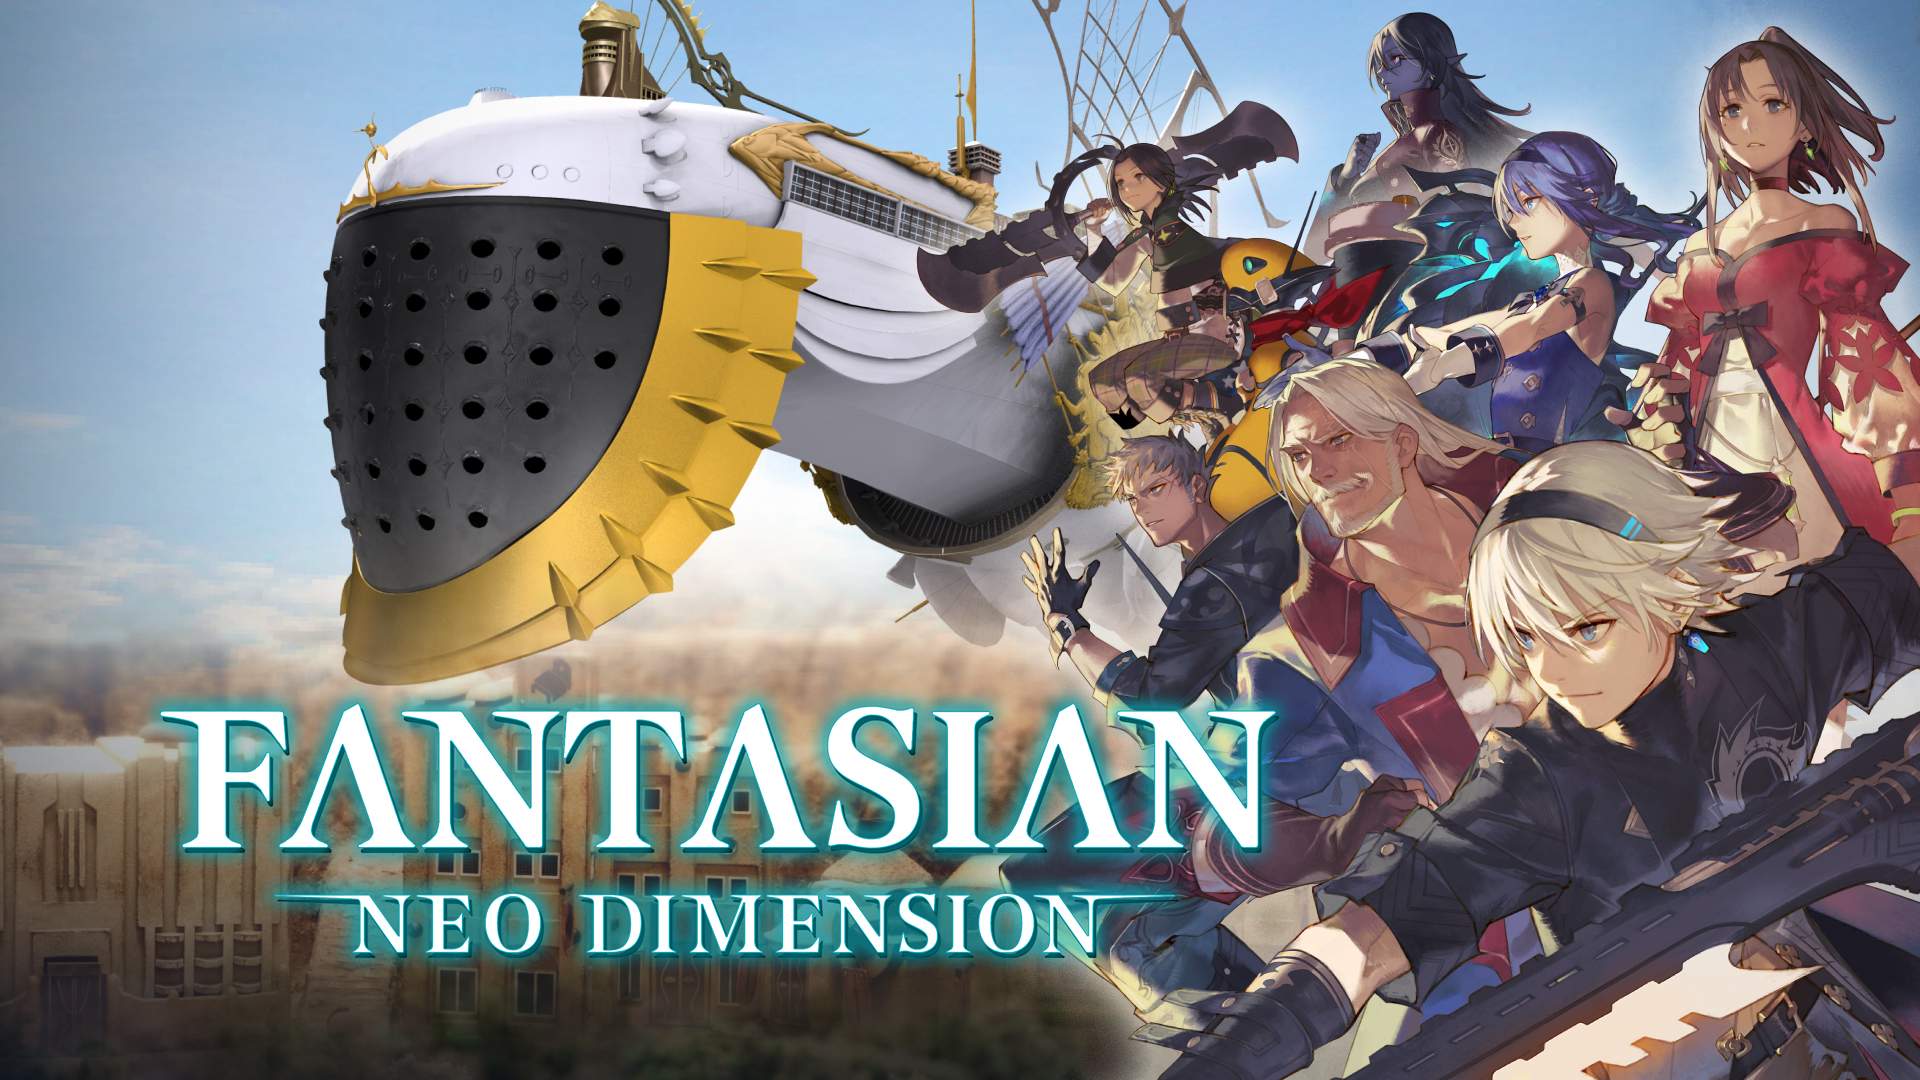 The cast of FANTASIAN Neo Dimension looking to the left, with the UZRA airship in the background.